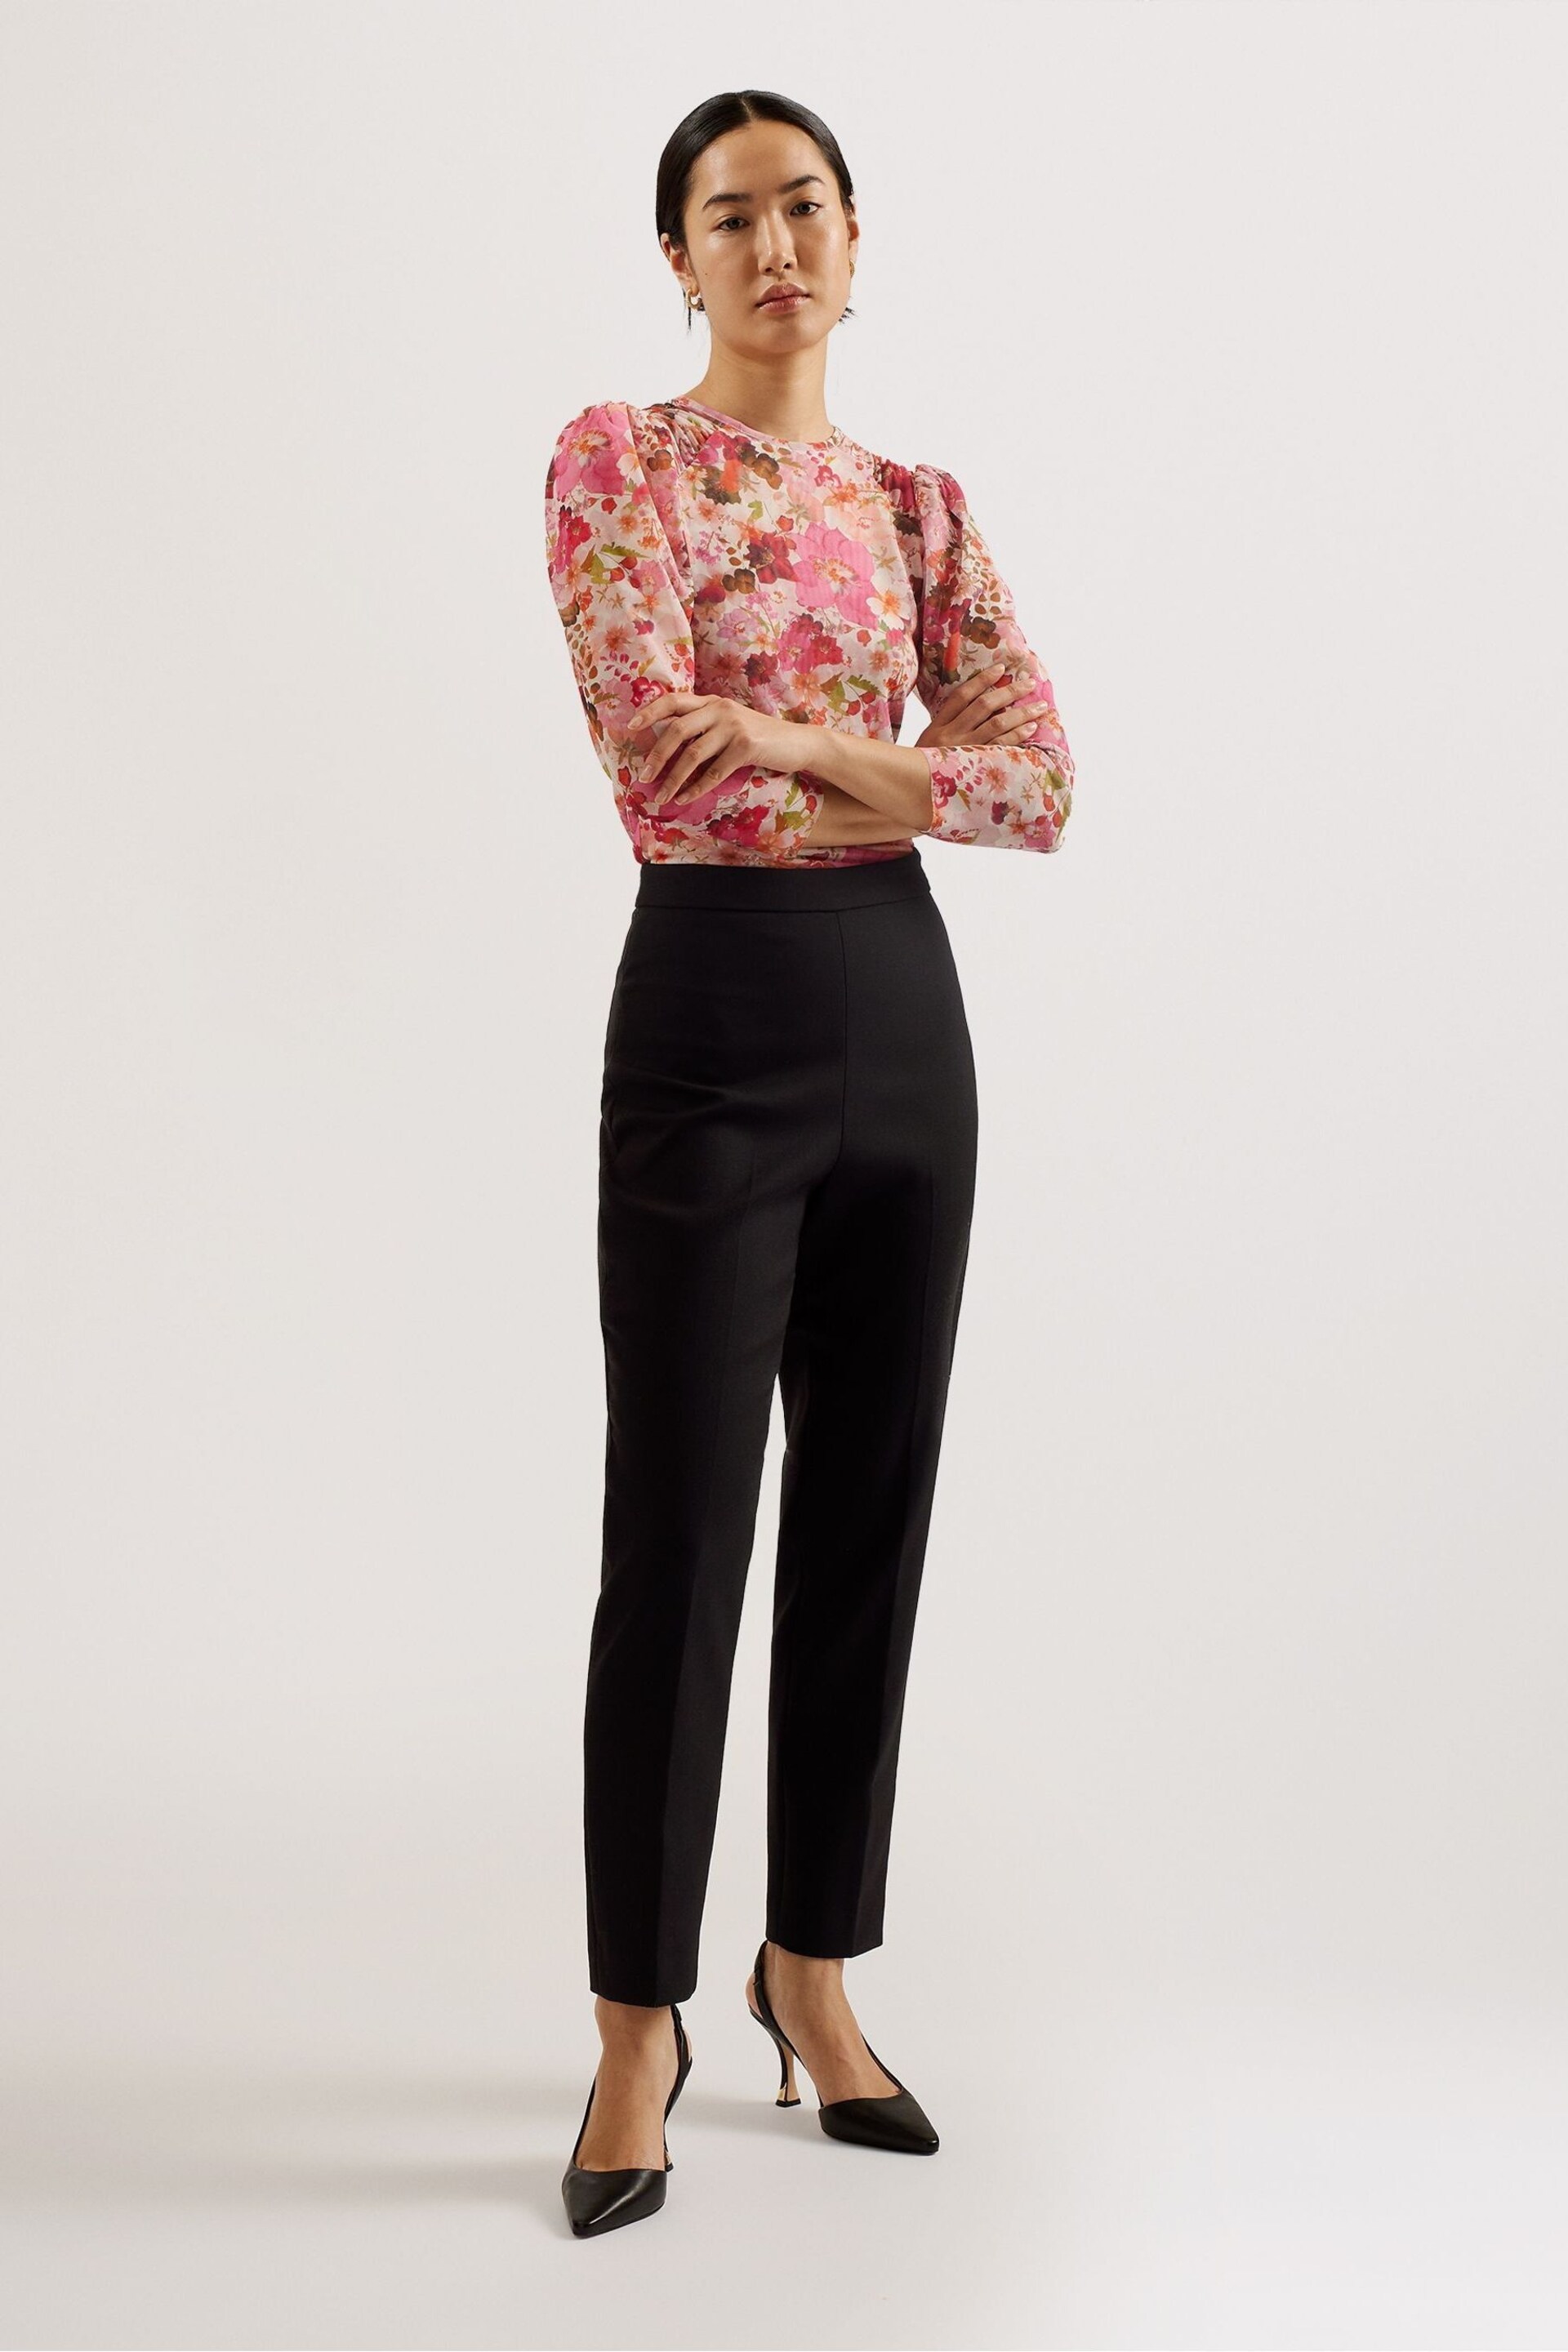 Ted Baker Black Manabut Tailored Trousers - Image 1 of 5